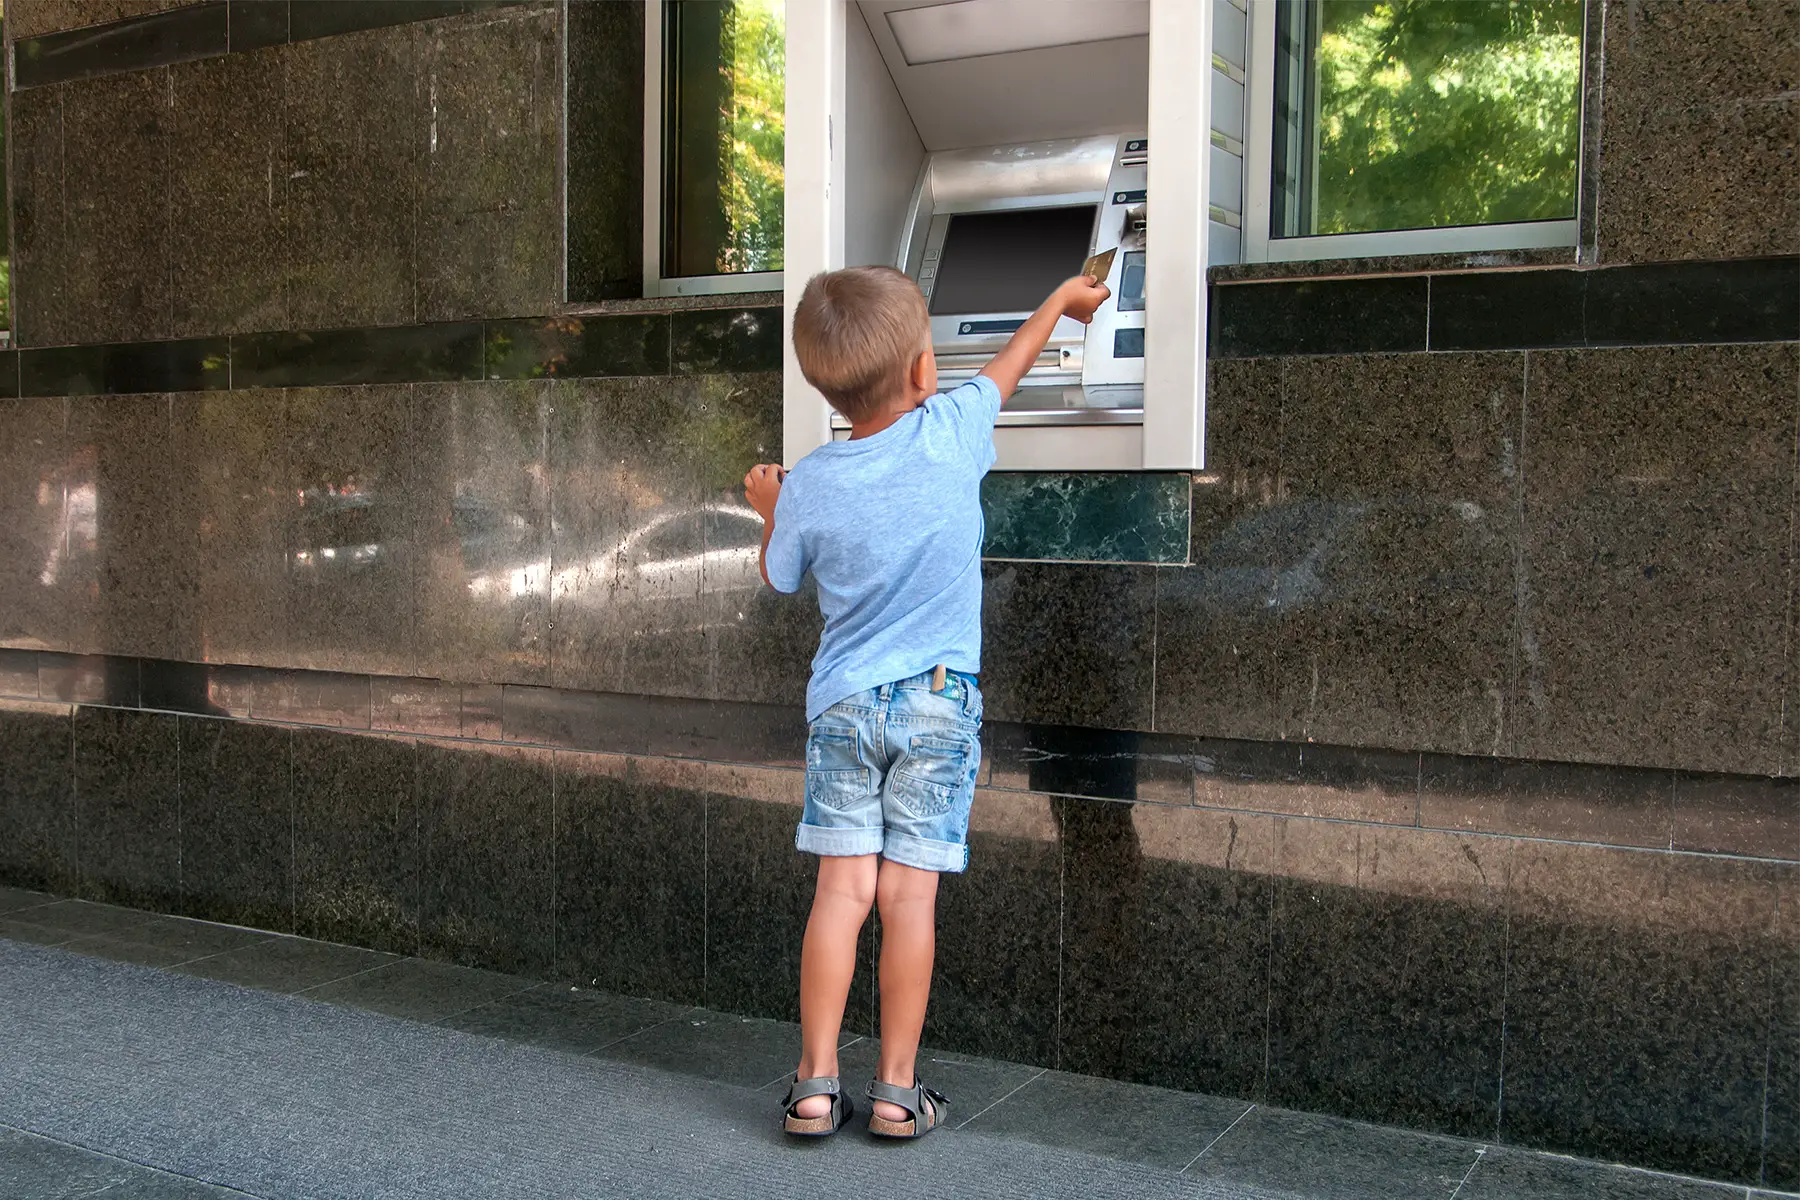 Young boy using ATM